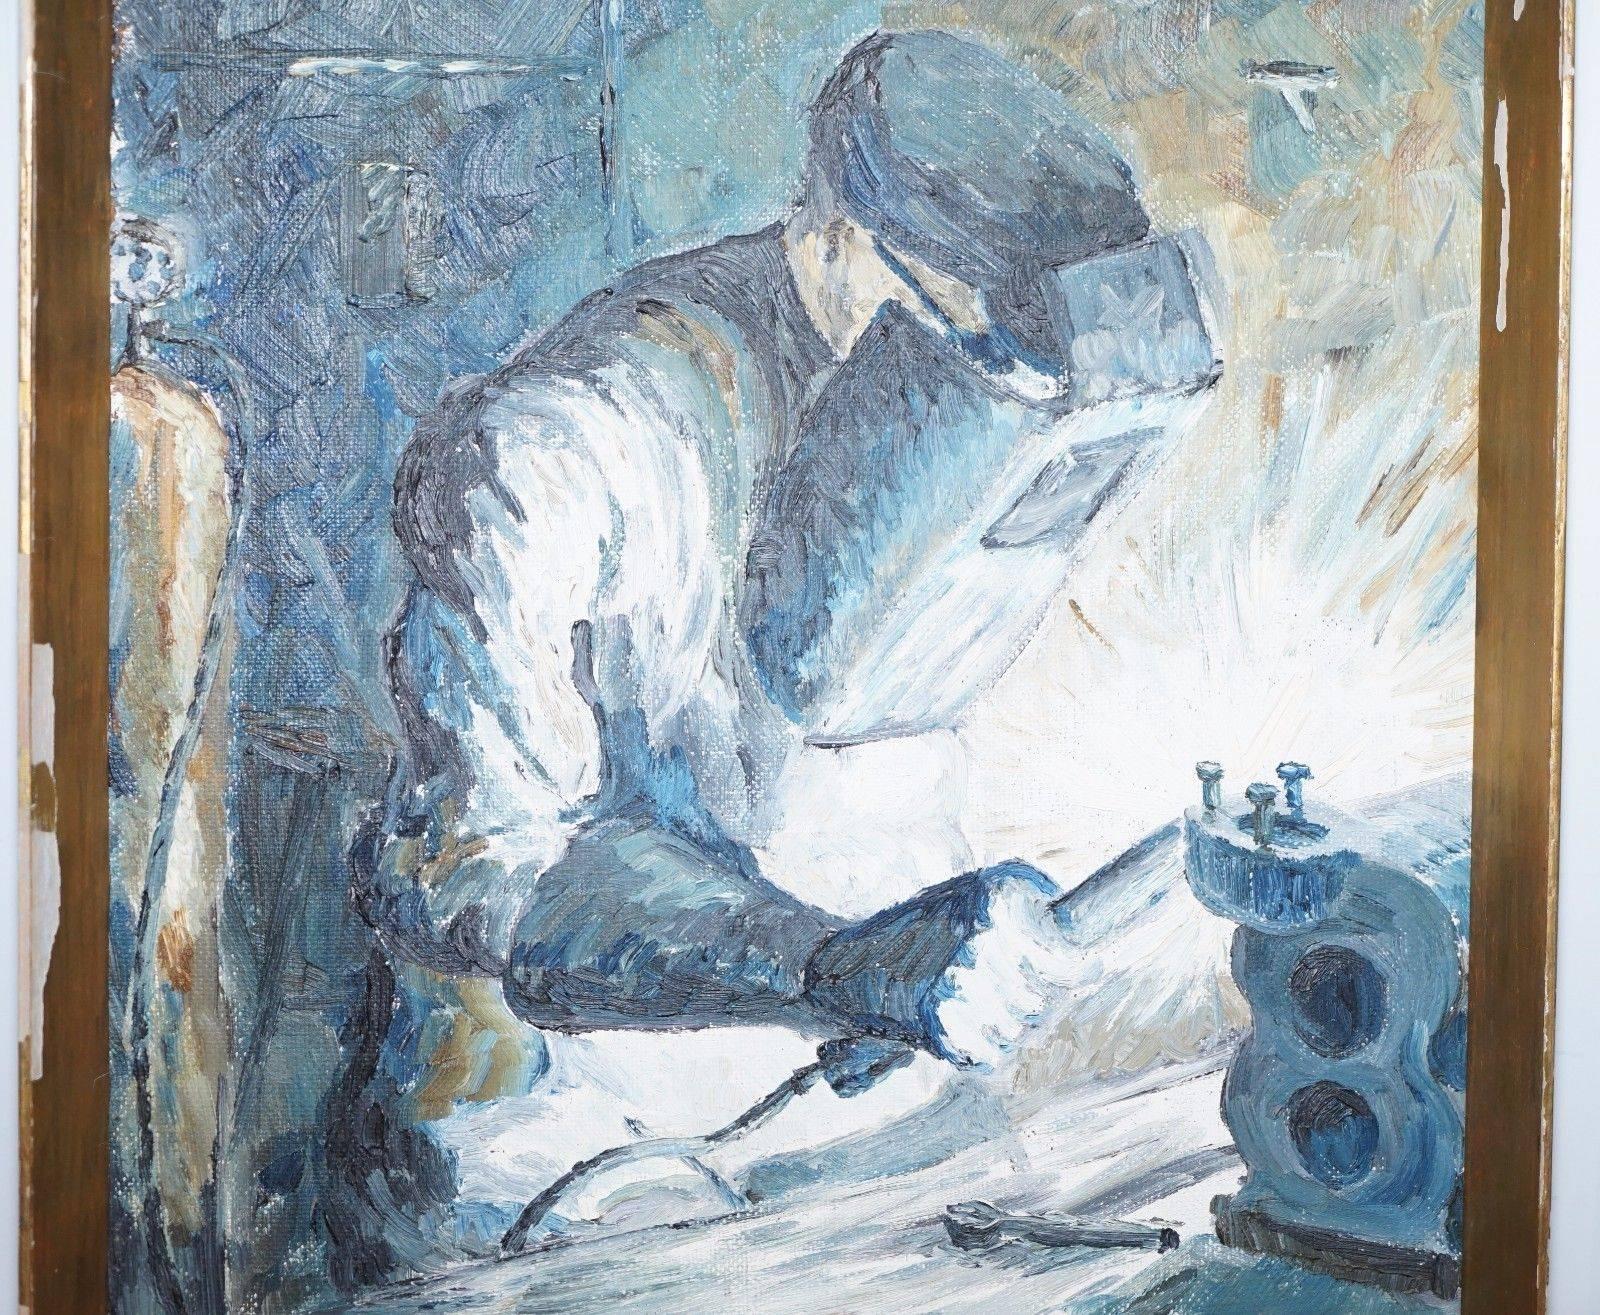 We are delighted to offer for sale this original H Stephens signed Oil painting of an industrial welder

A very much of its time, piece, there was a great movement, I forgot the name of it but it was all about painting the working normal people in